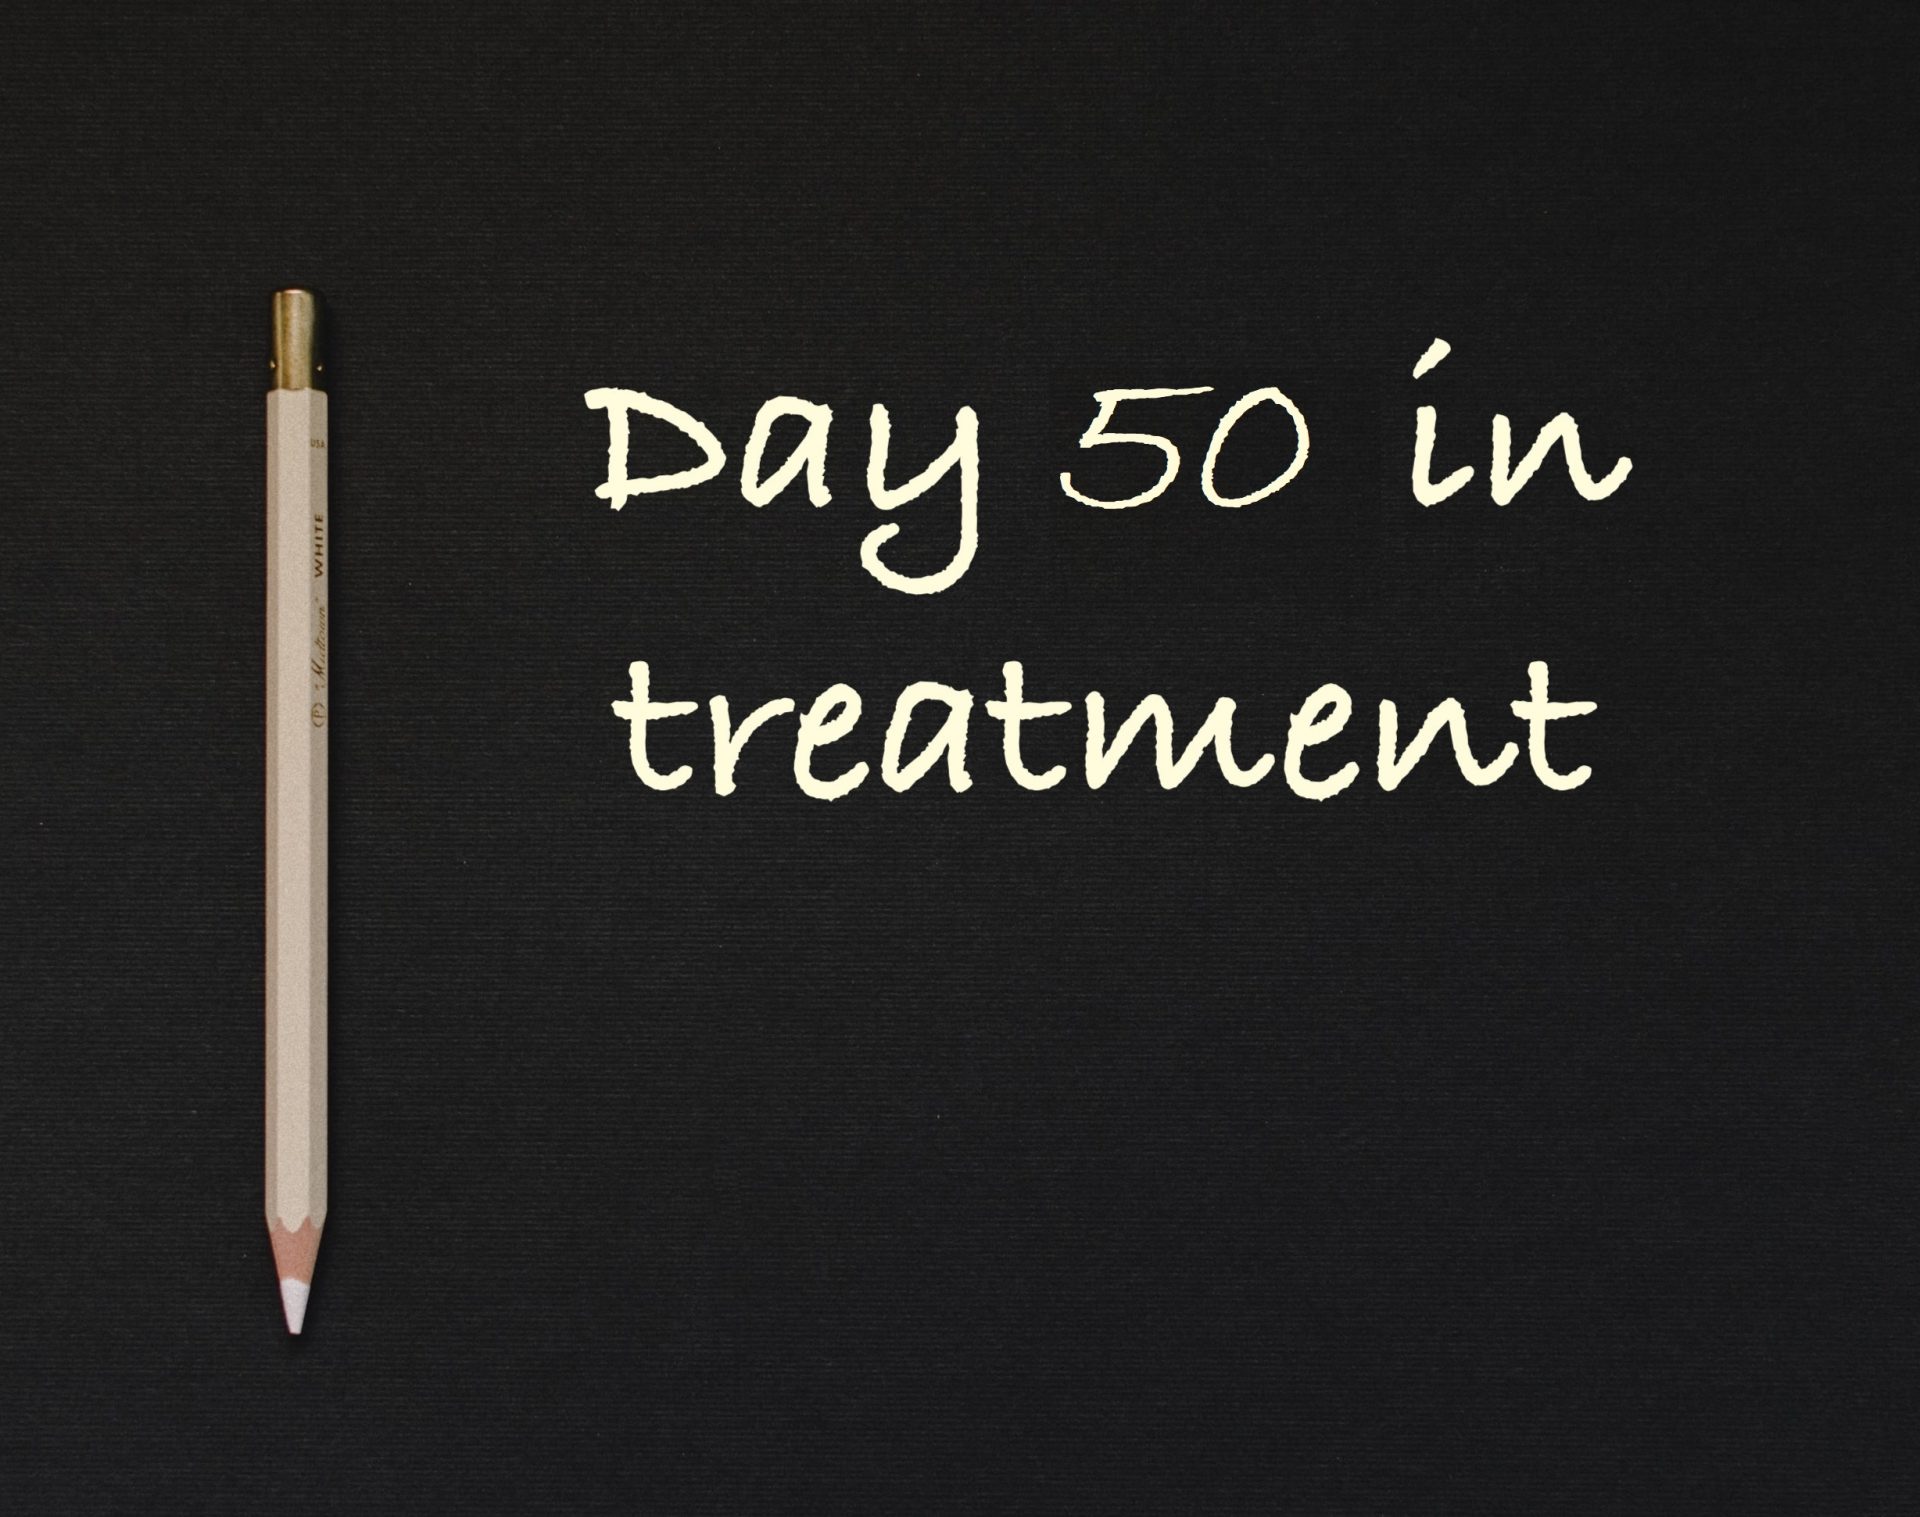 Day 50 in treatment